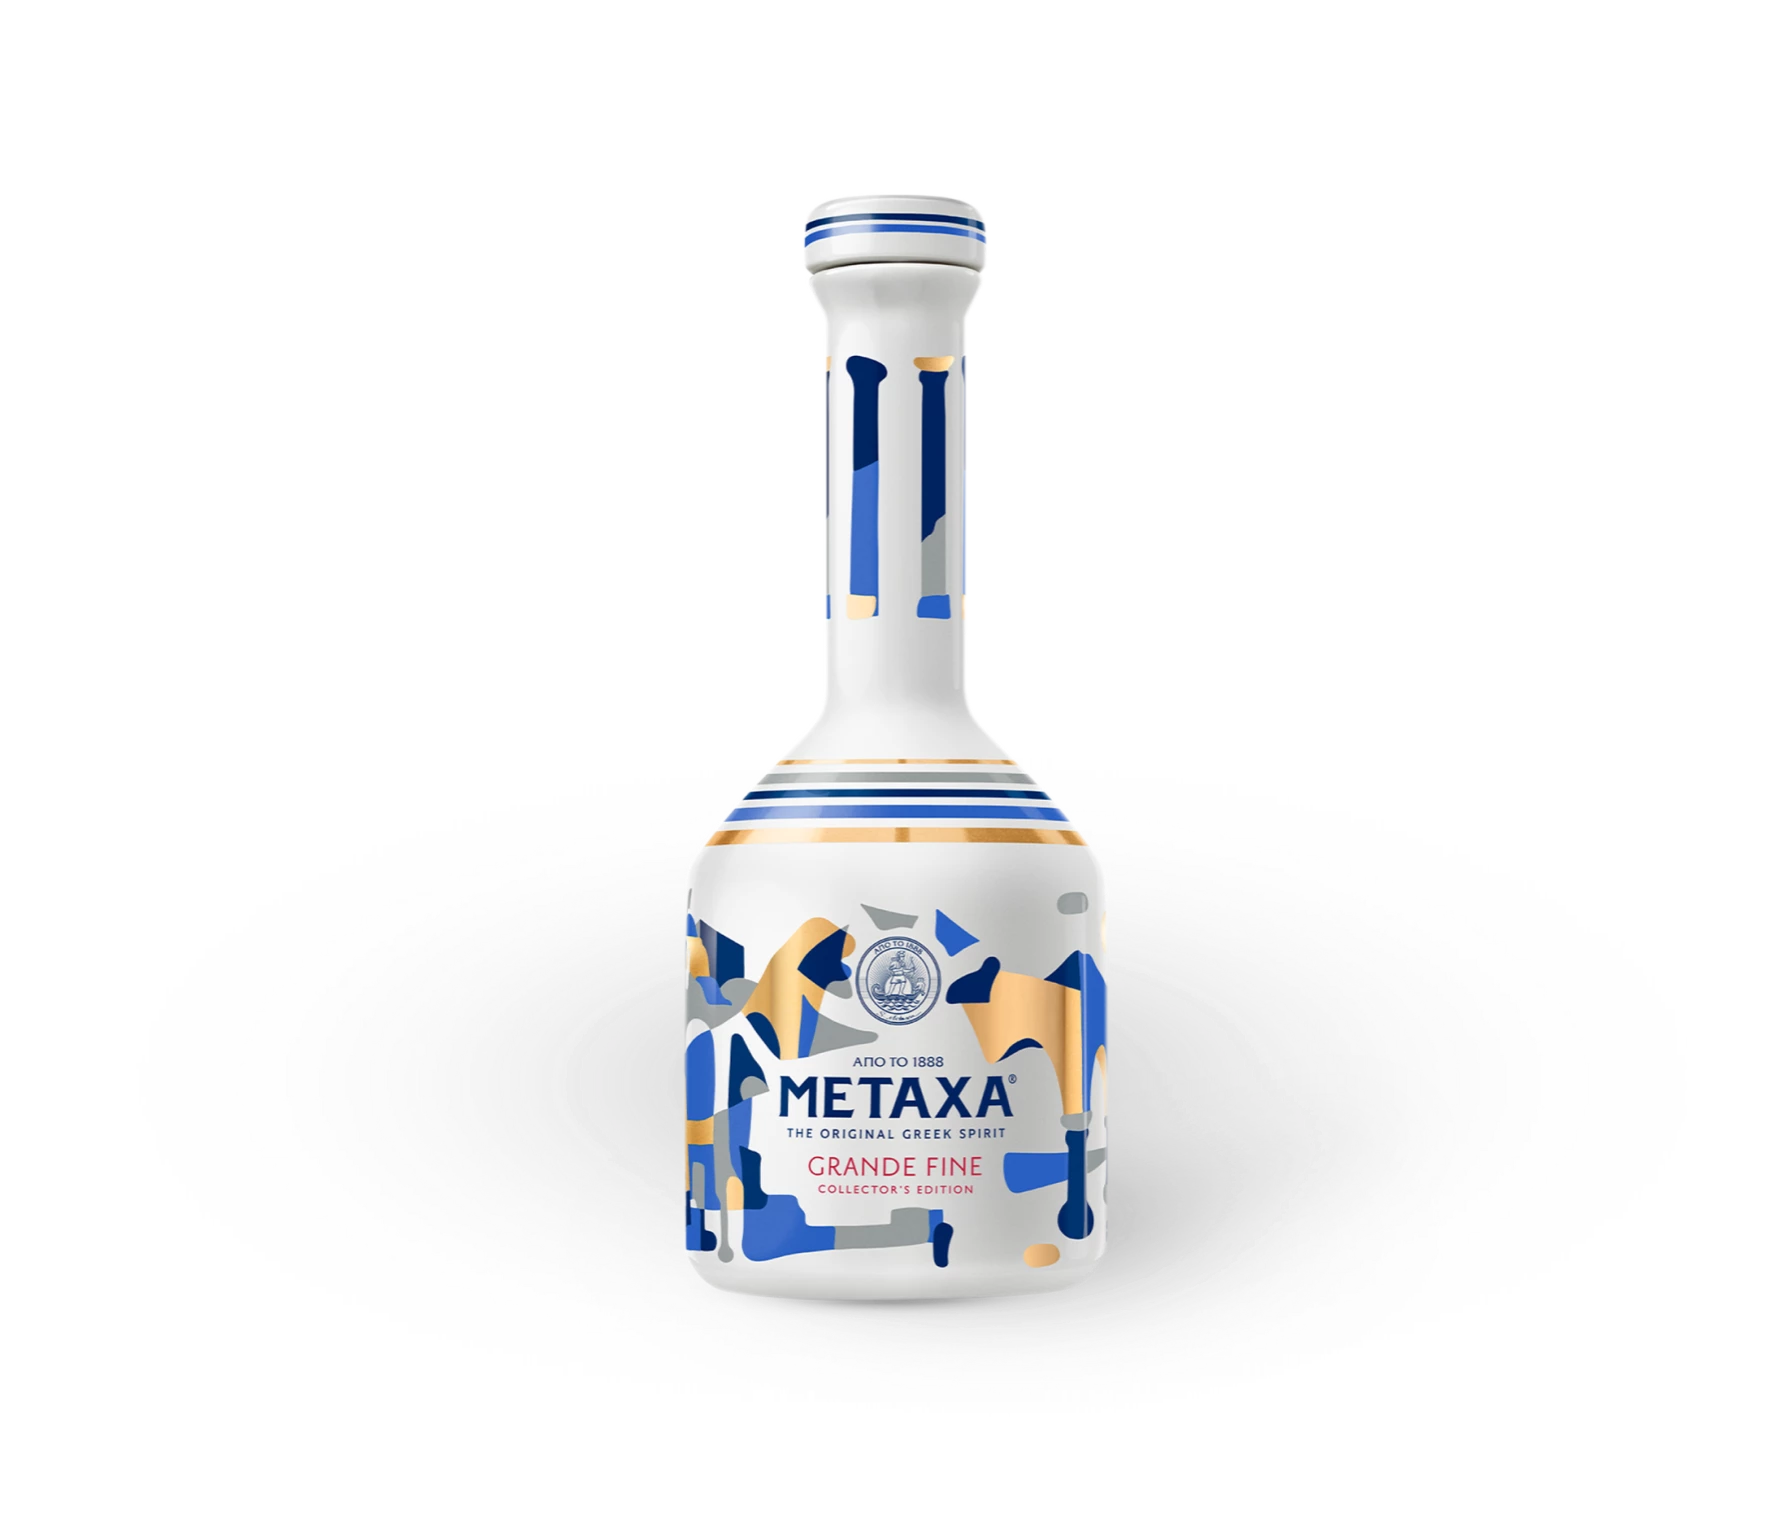 METAXA 12 Stars - spicy with dried notes fruit